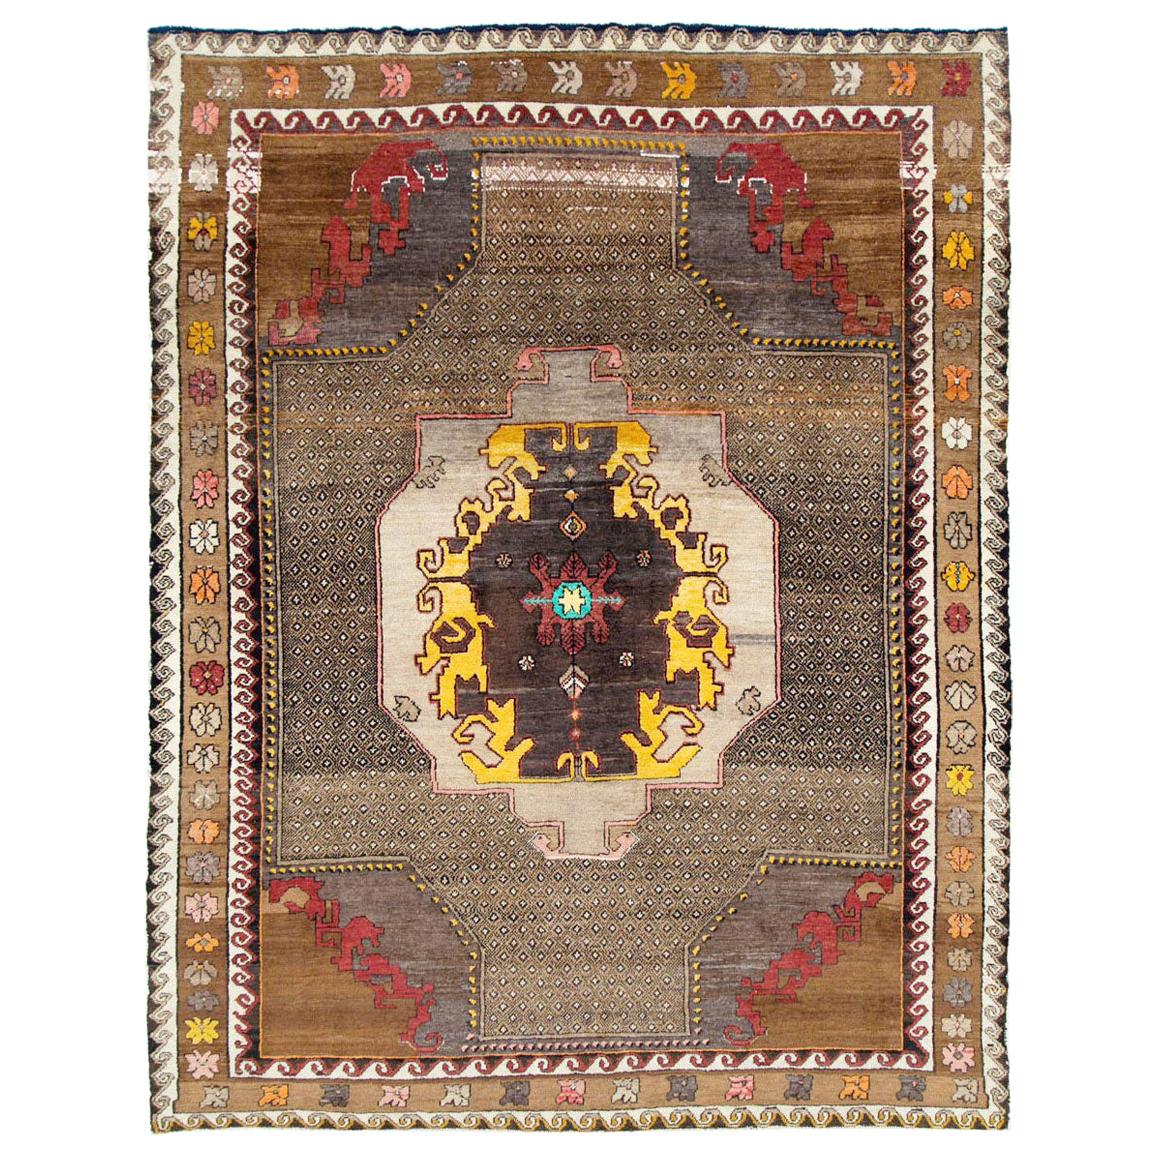 Midcentury Handmade Turkish Tribal Room Size Rug in Brown Yellow and Red